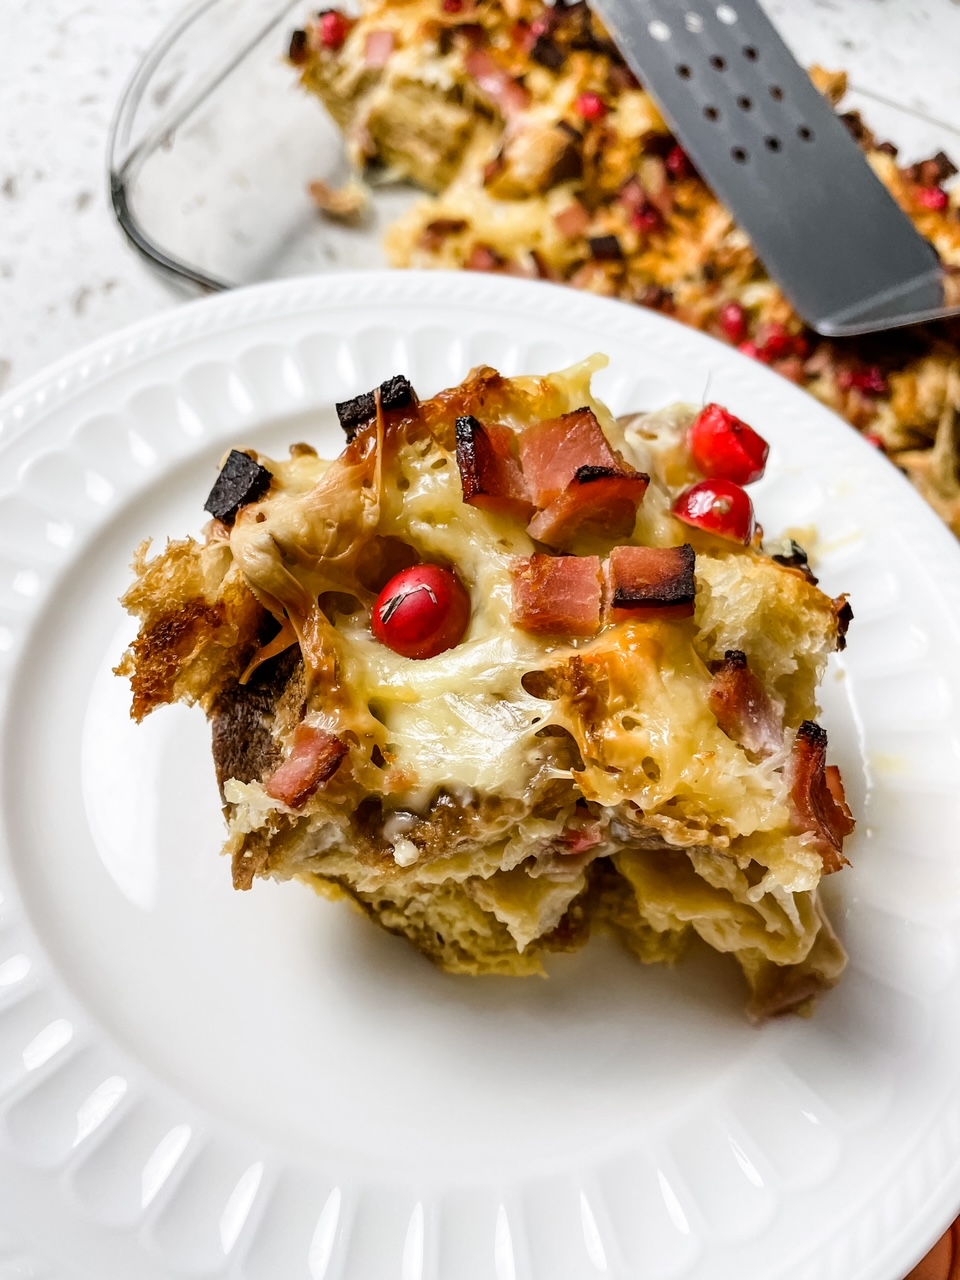 A slice of the Cranberry, Ham and Swiss Cheese Breakfast Casserole, served on a white plate